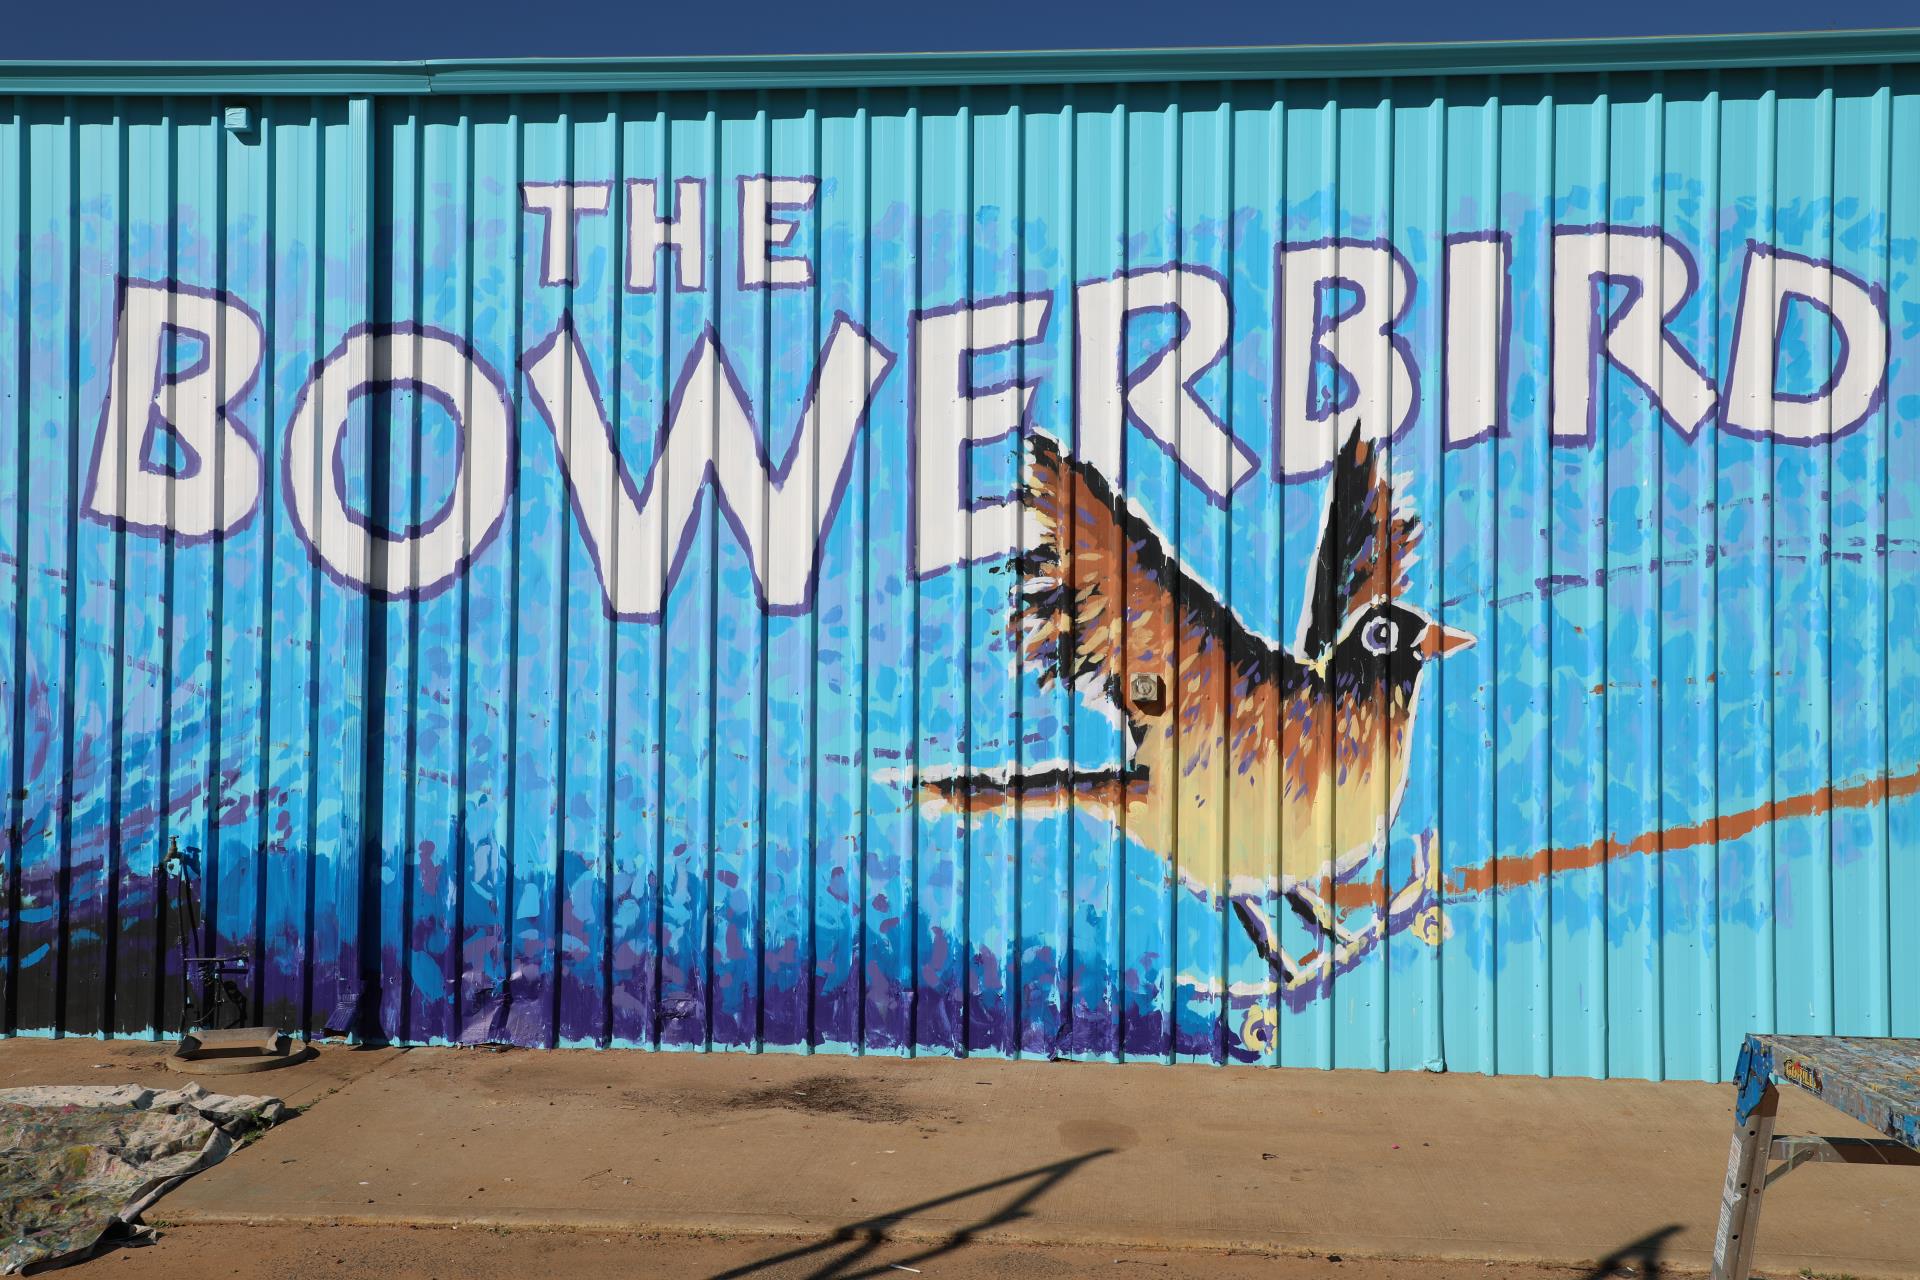 The Bowerbird comes to nest under City ownership